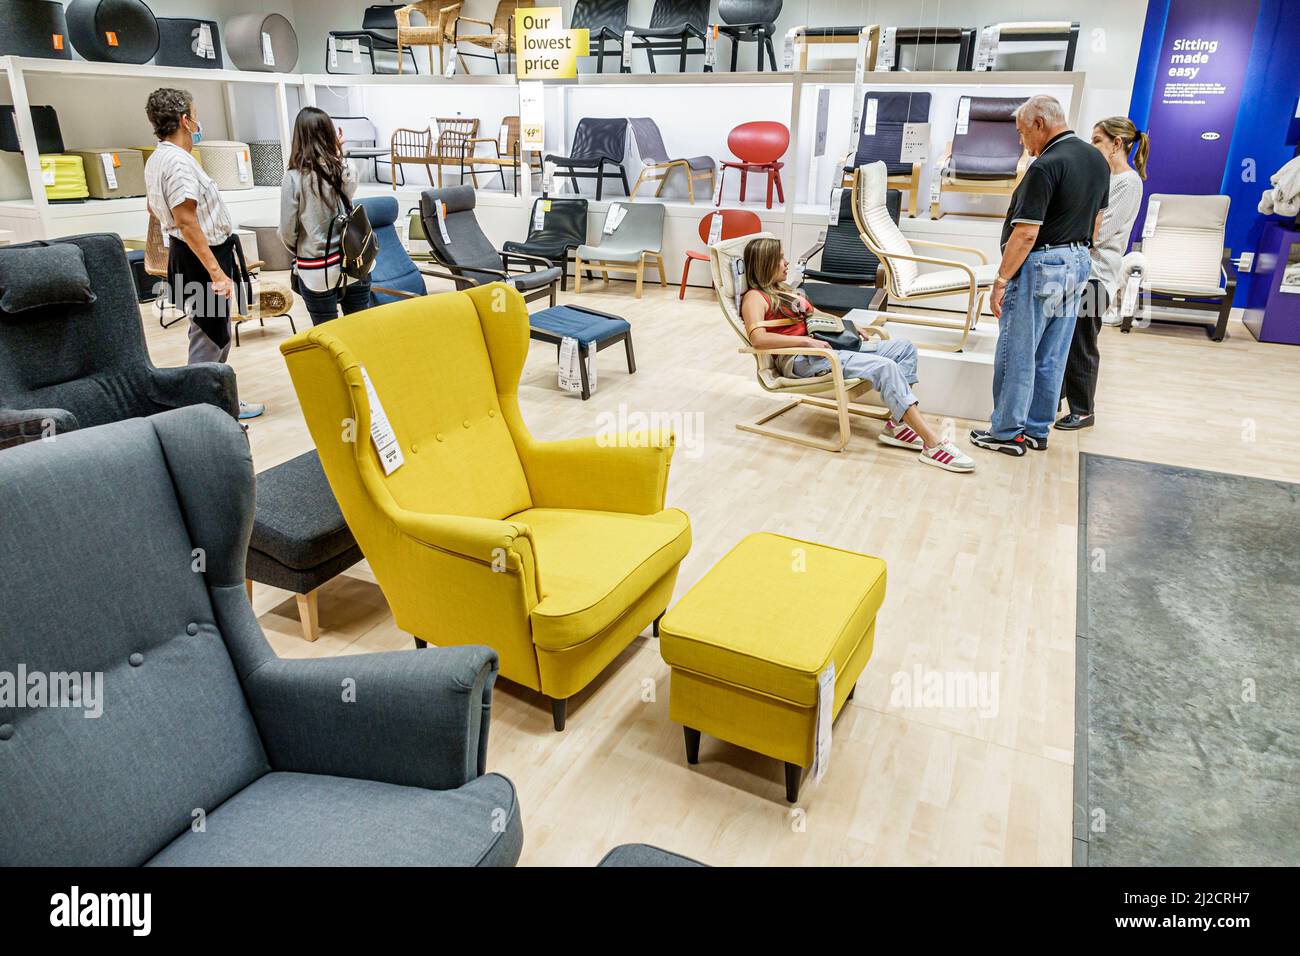 Miami Florida IKEA home goods furnishings accessories furniture decor shopping shoppers inside interior display sale chairs family looking trying Stock Photo